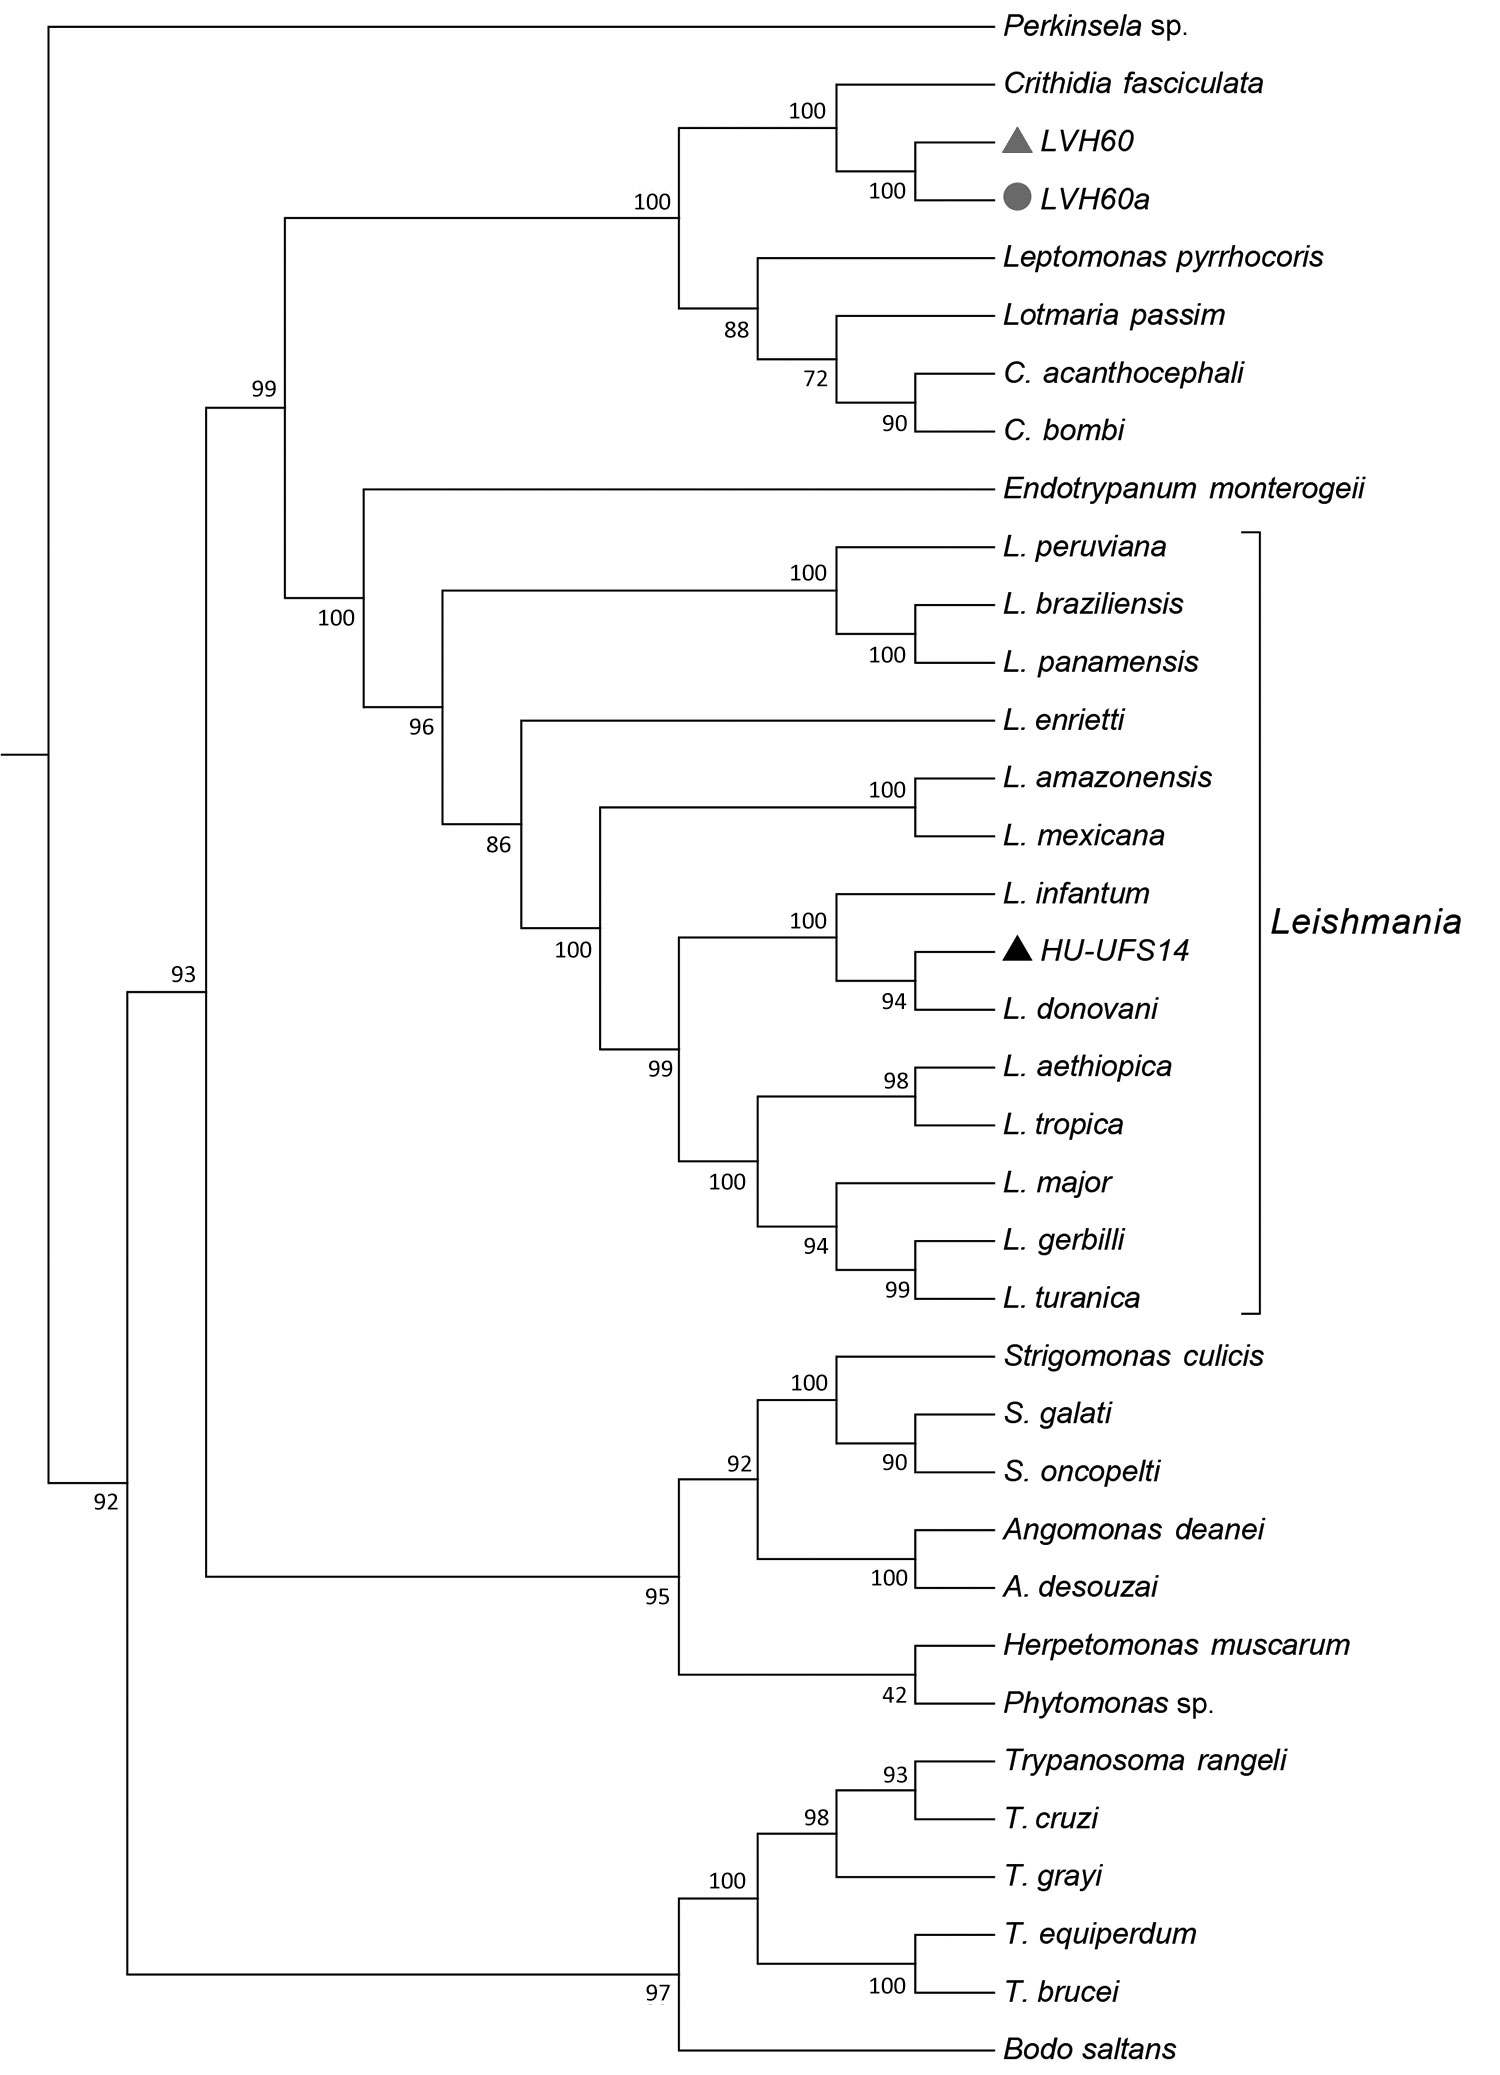 Phylogenomic analysis of genomewide orthologous coding sequences from LVH60 and LVH60a clinical isolates from a 64-year-old man with fatal visceral leishmaniasis–like illness, Brazil, and 33 Trypanosomatida species. Dendrogram shows the genetic relationships among all species investigated in the current study. Hierarchical clustering was performed with a set of ≈6,400 orthologous genes across 33 trypanosomatids, designated as the total orthologous median matrix. HU-UFS14 (black triangle; L. infa